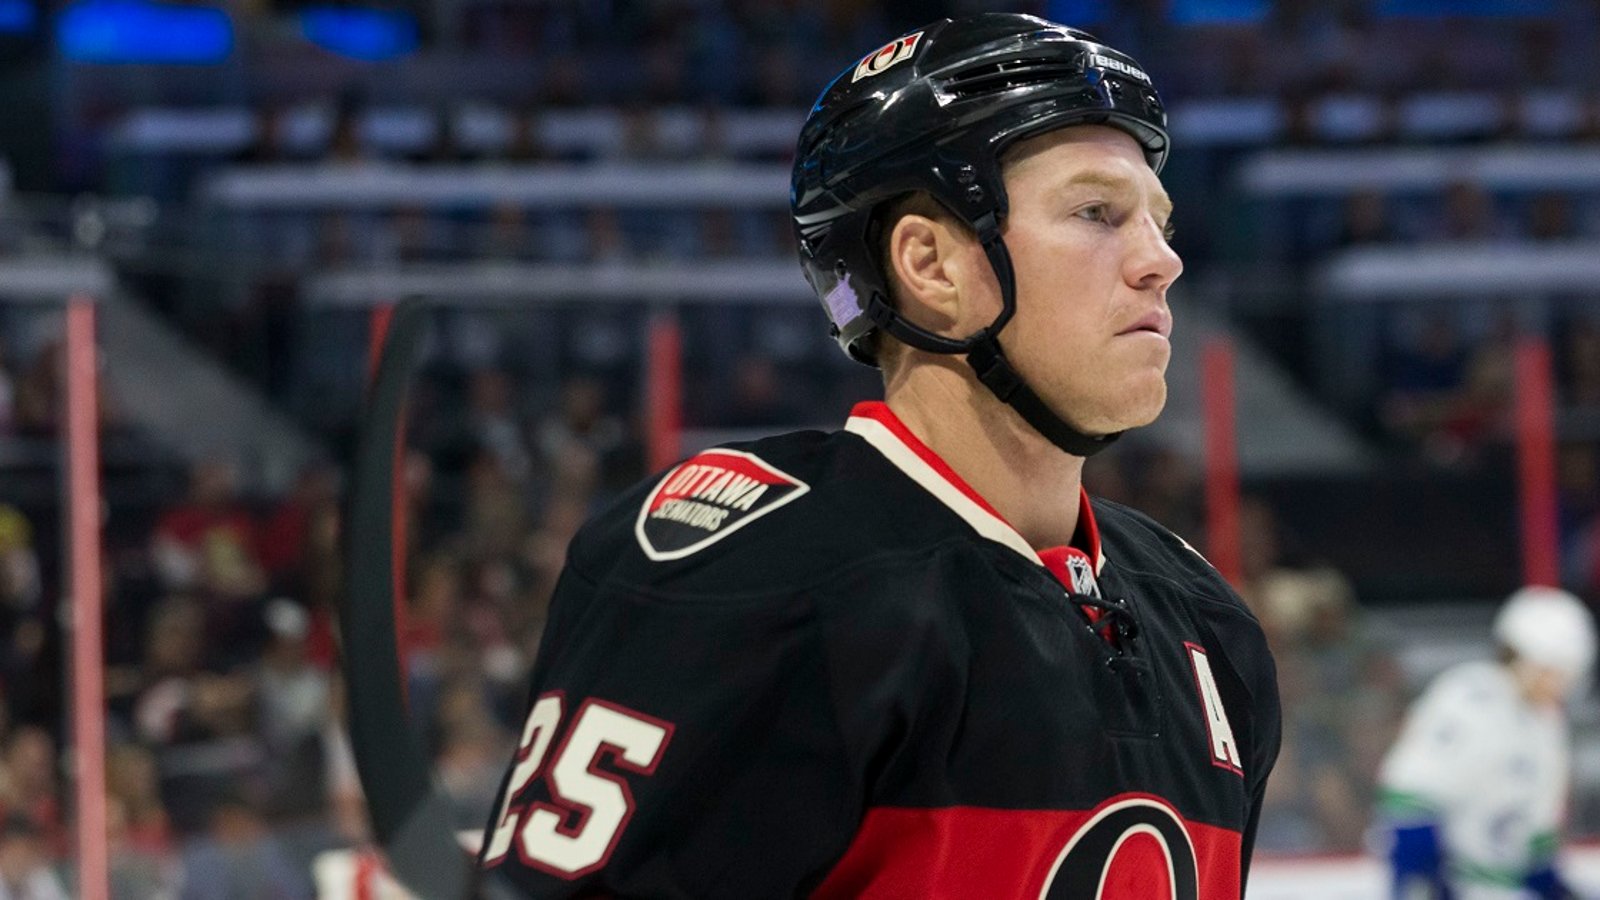 Breaking: NHL enforcer Chris Neil may soon be playing for rival team!